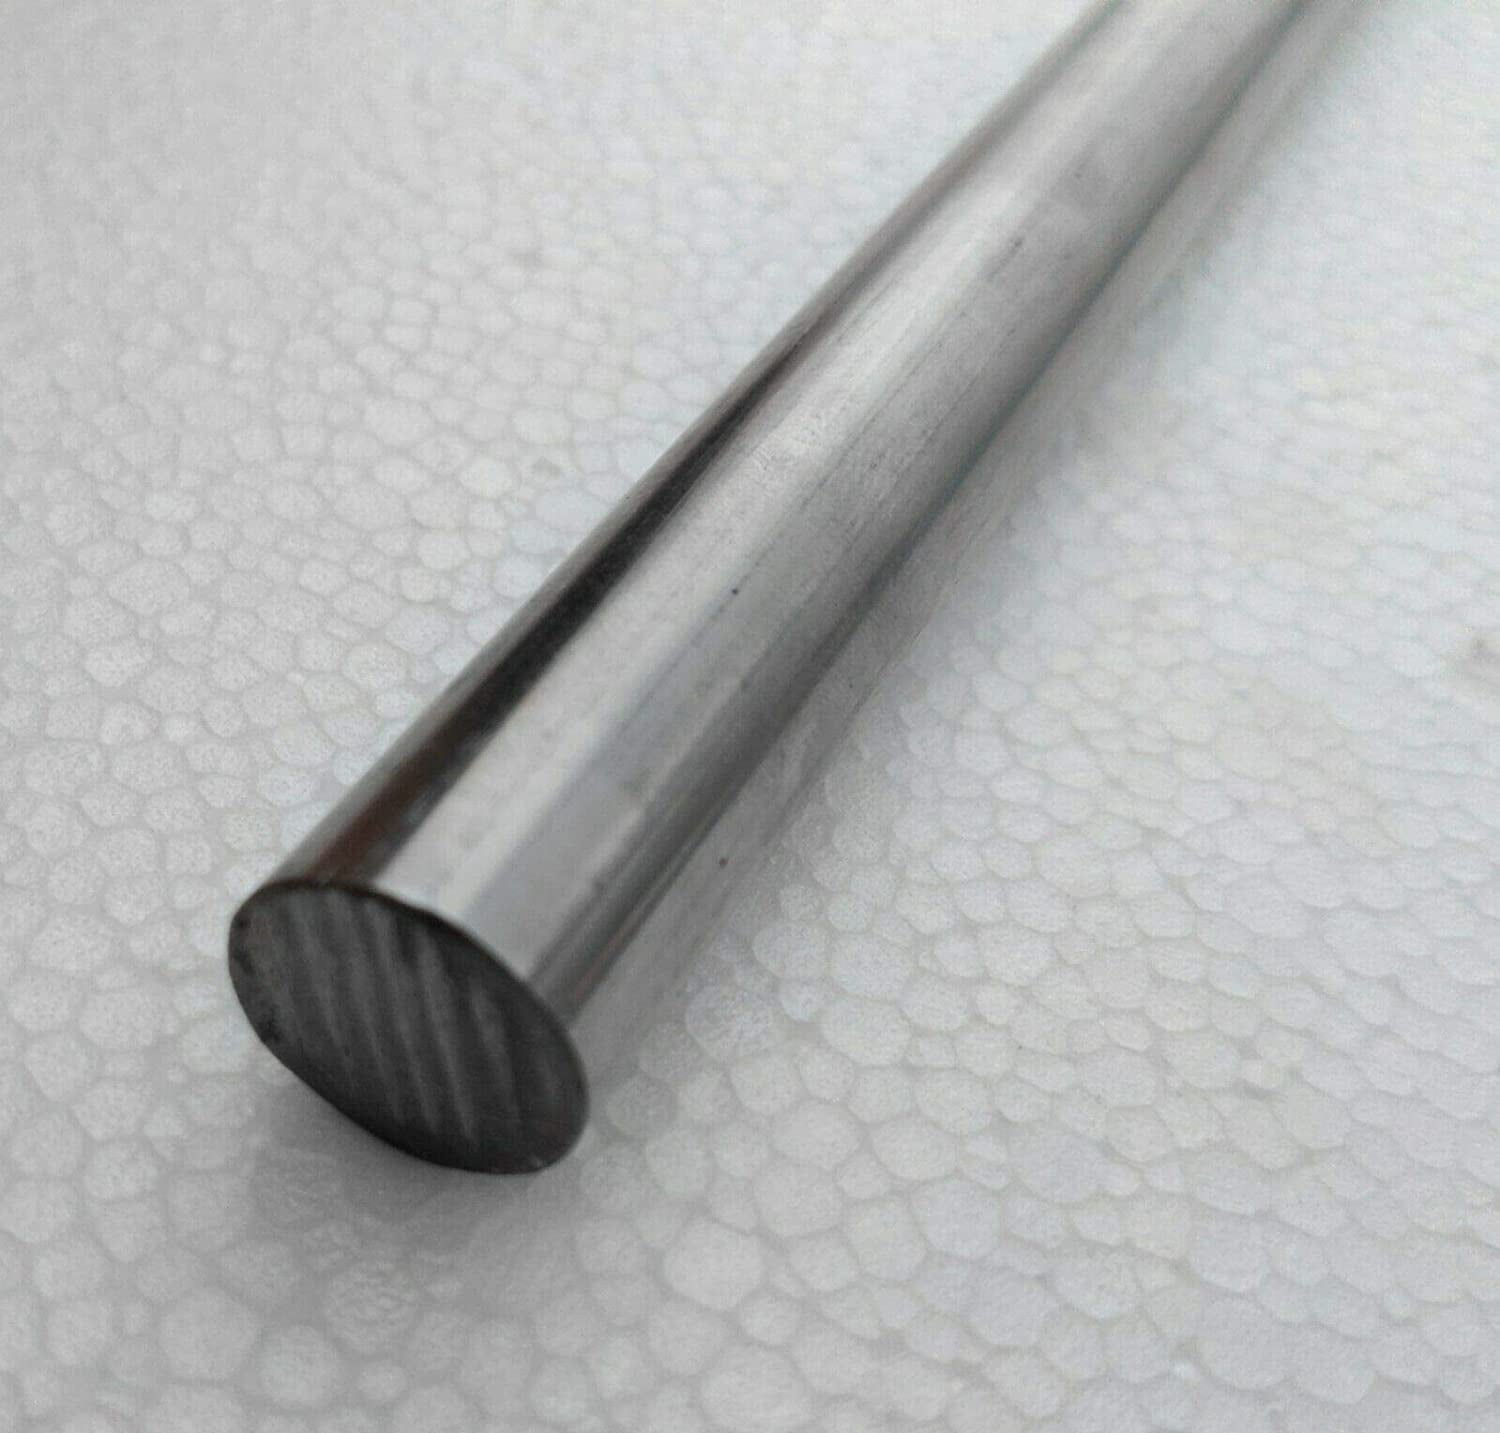 30mm 1-1/4" 1-1/2" Round Bar STAINLESS STEEL Rod MILLING WELDING METAL WORKING